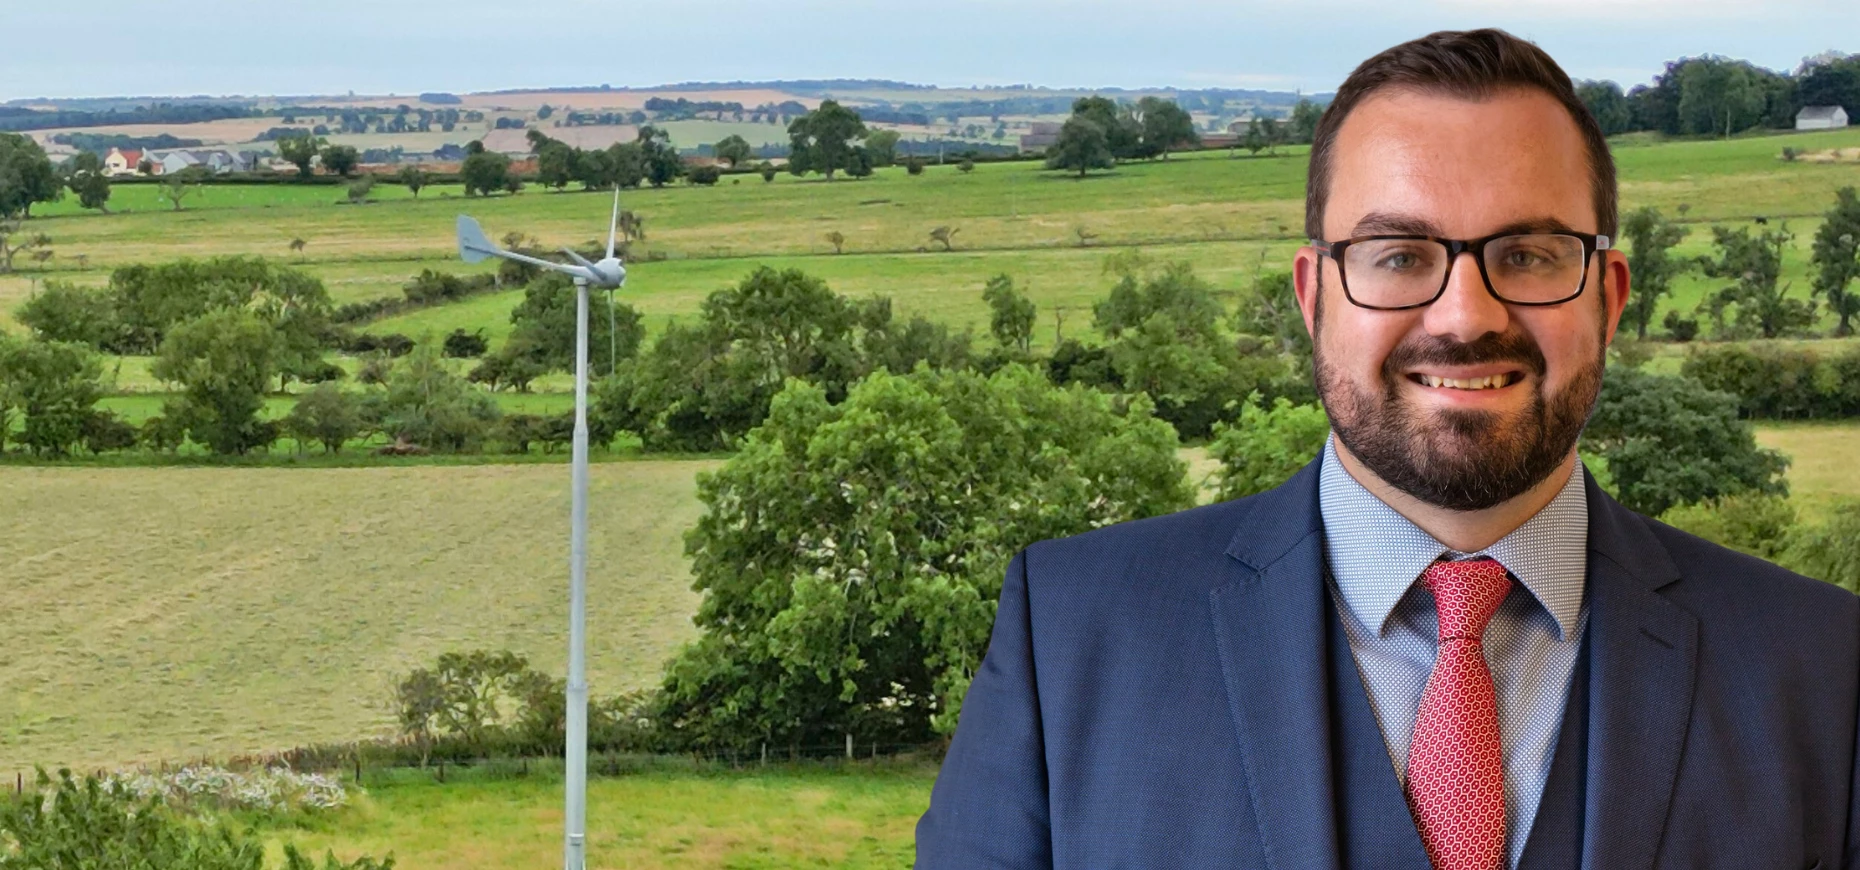 Joe Ridgeon, director at Hedley Planning, pictured in front of a wind turbine.